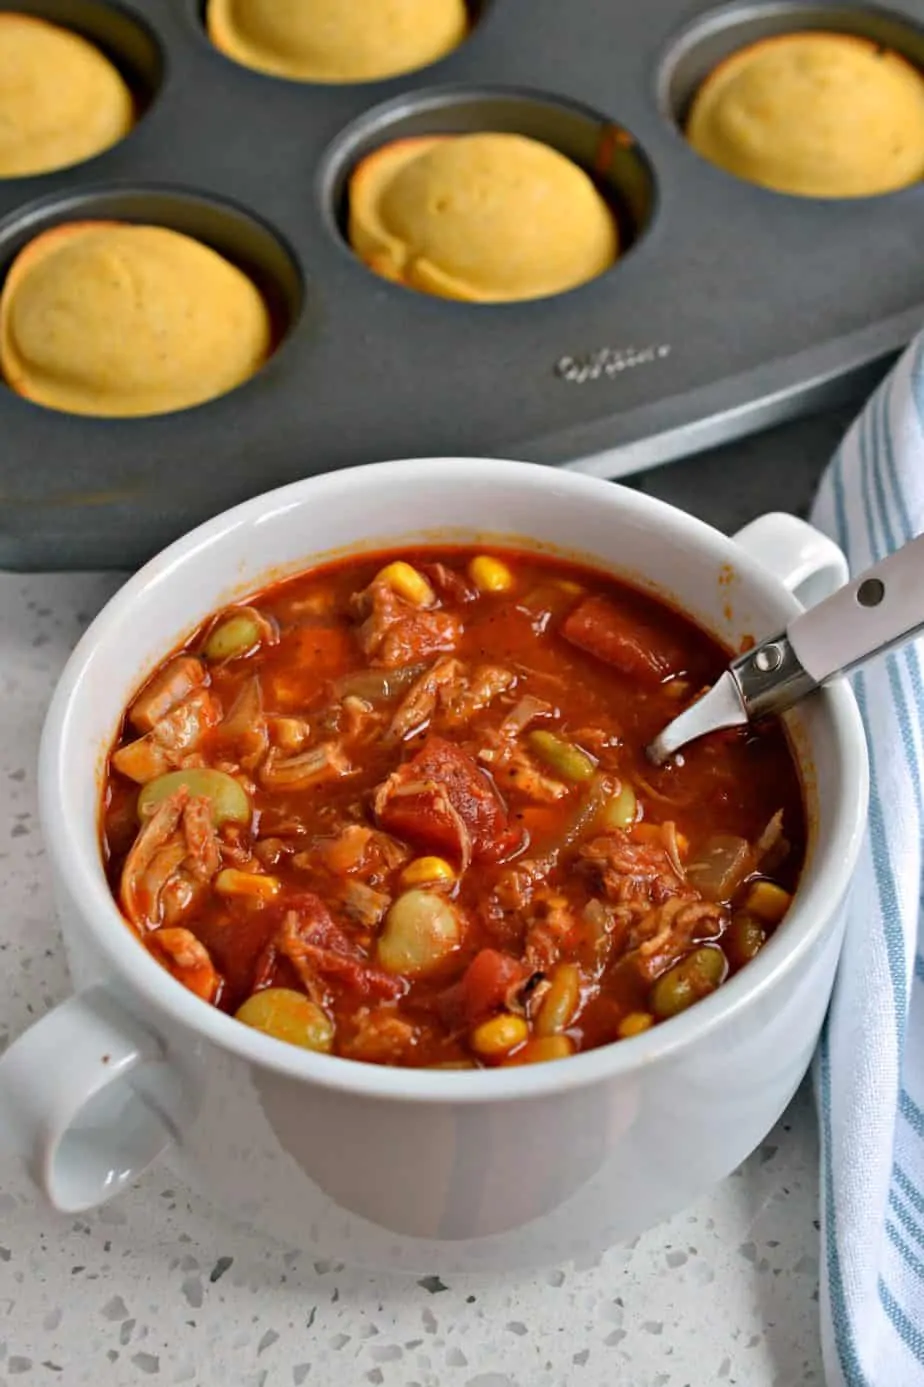 Brunswick Stew is a Southern stew made with barbecue sauce and smoked and roasted meats like pork, chicken and beef. 